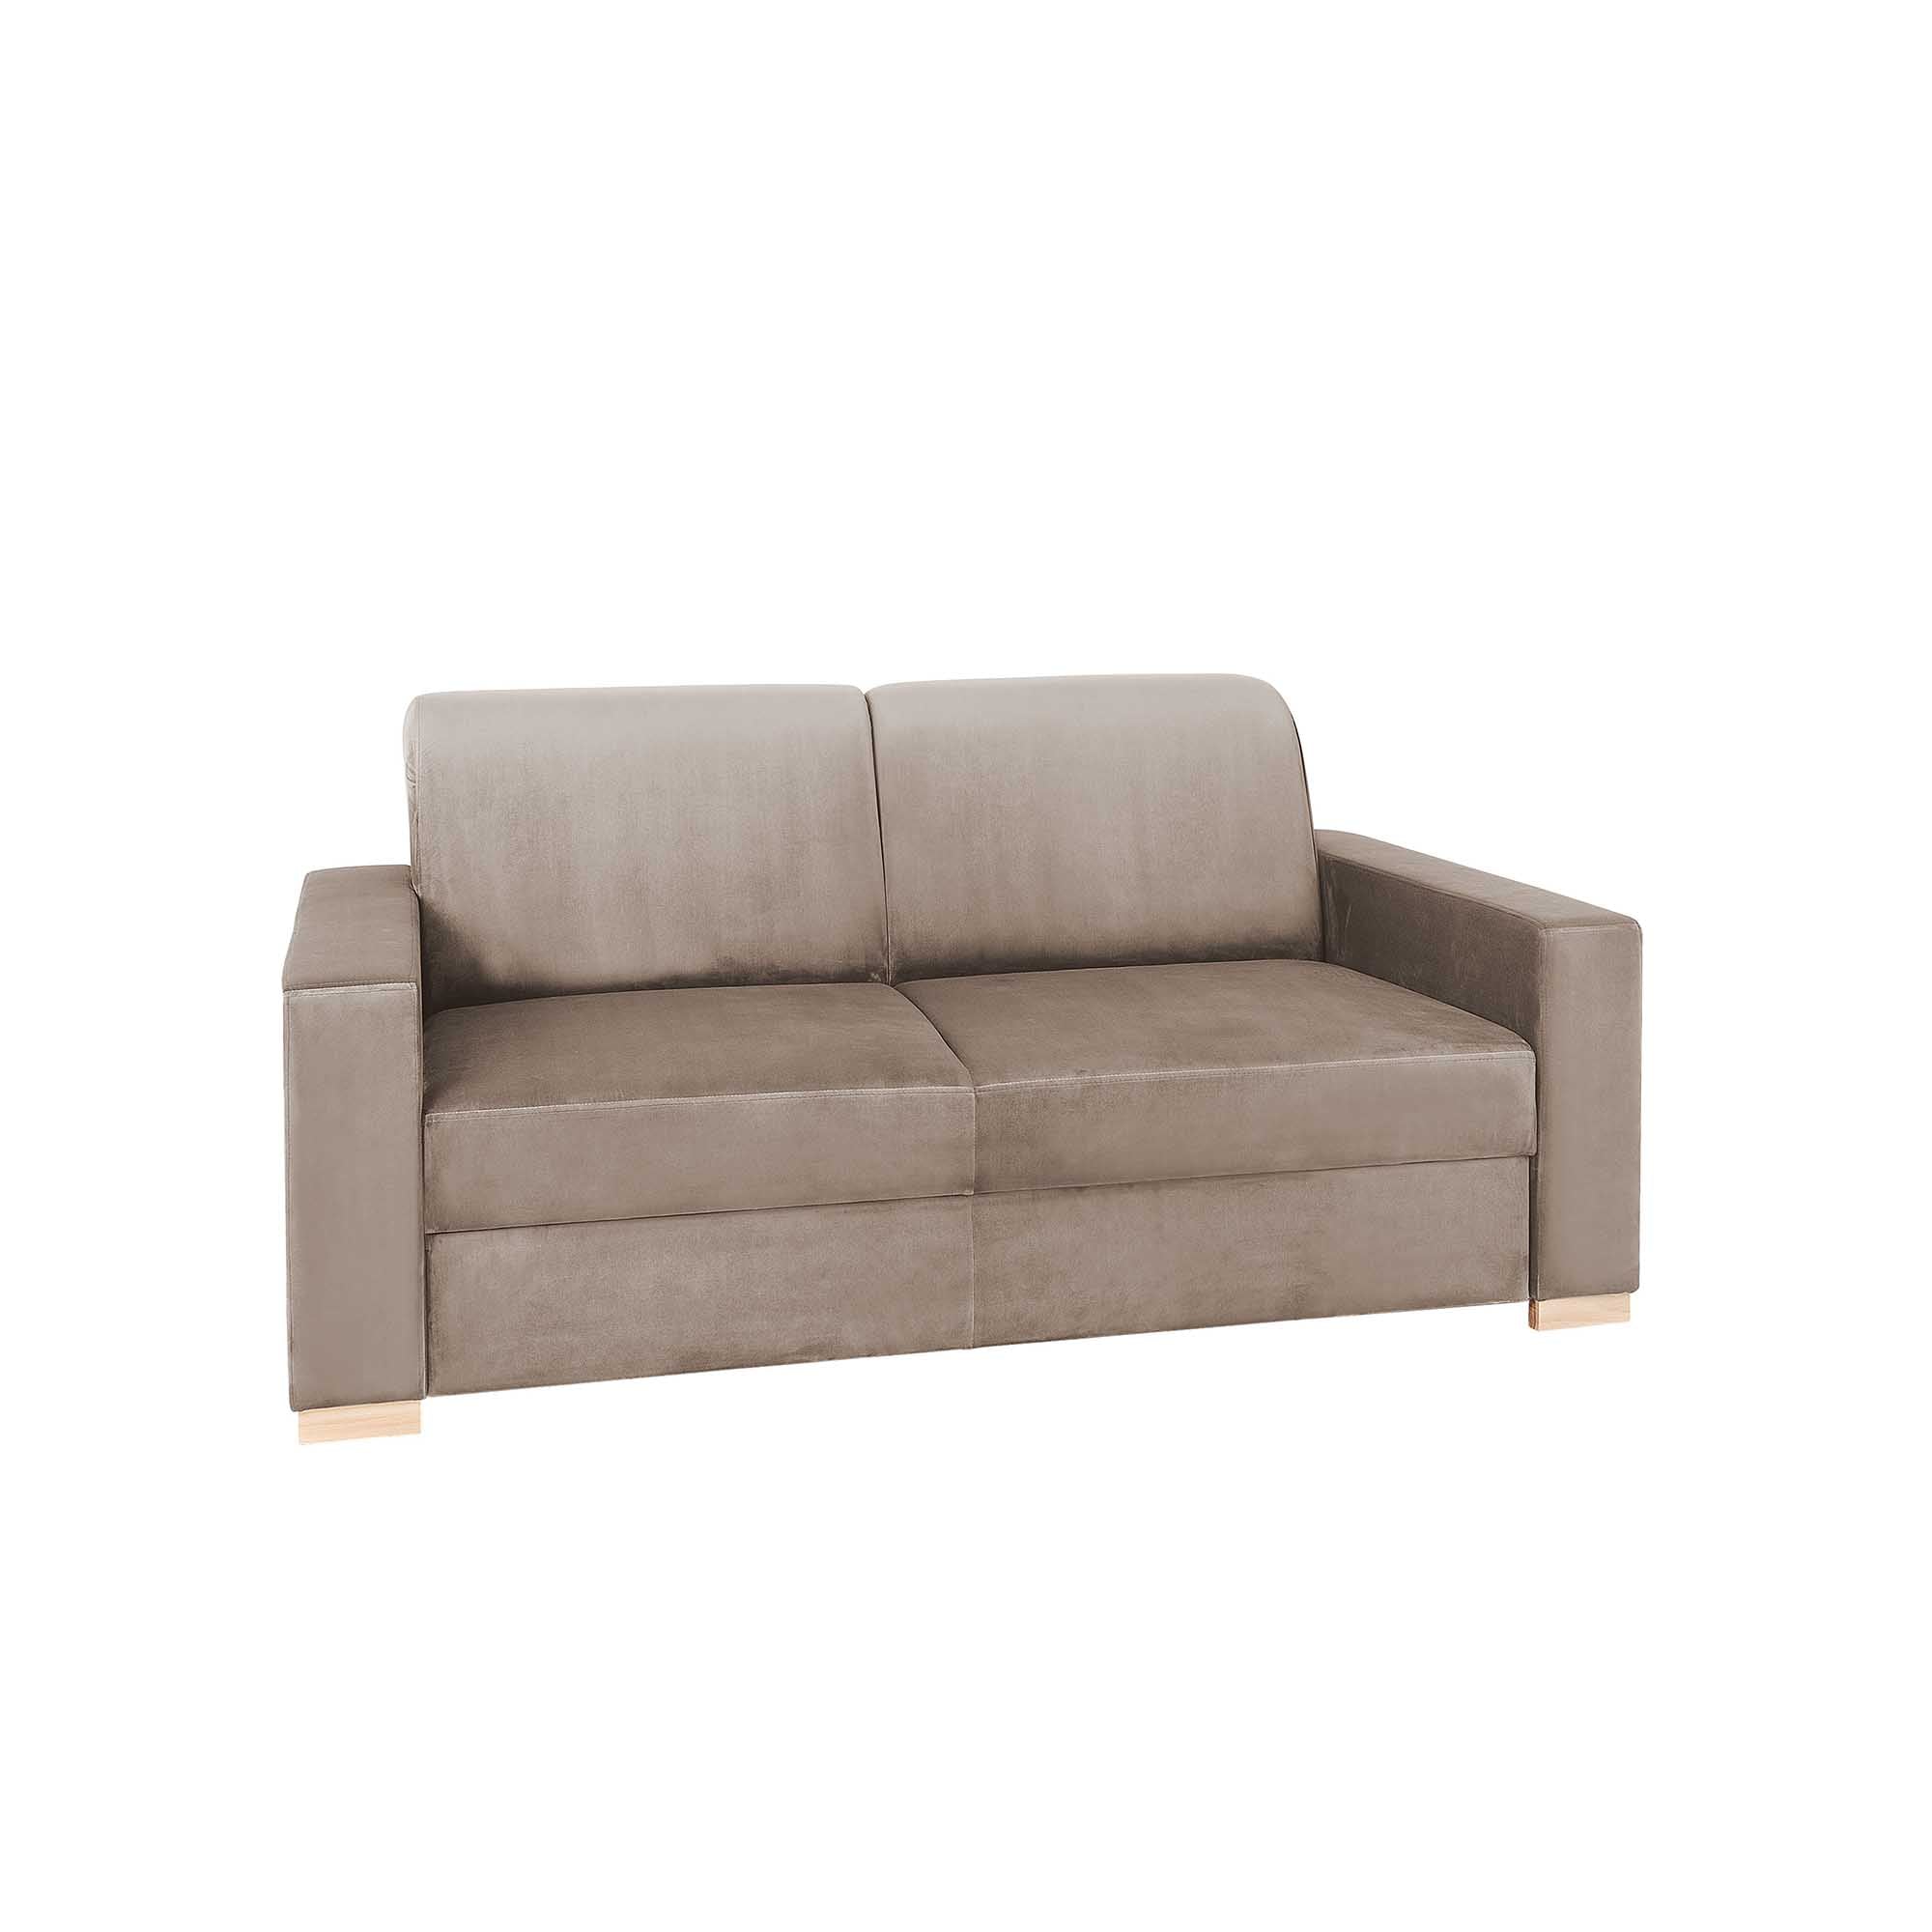 STABLE Sofa 2 Seaters upholstery colour beige front view